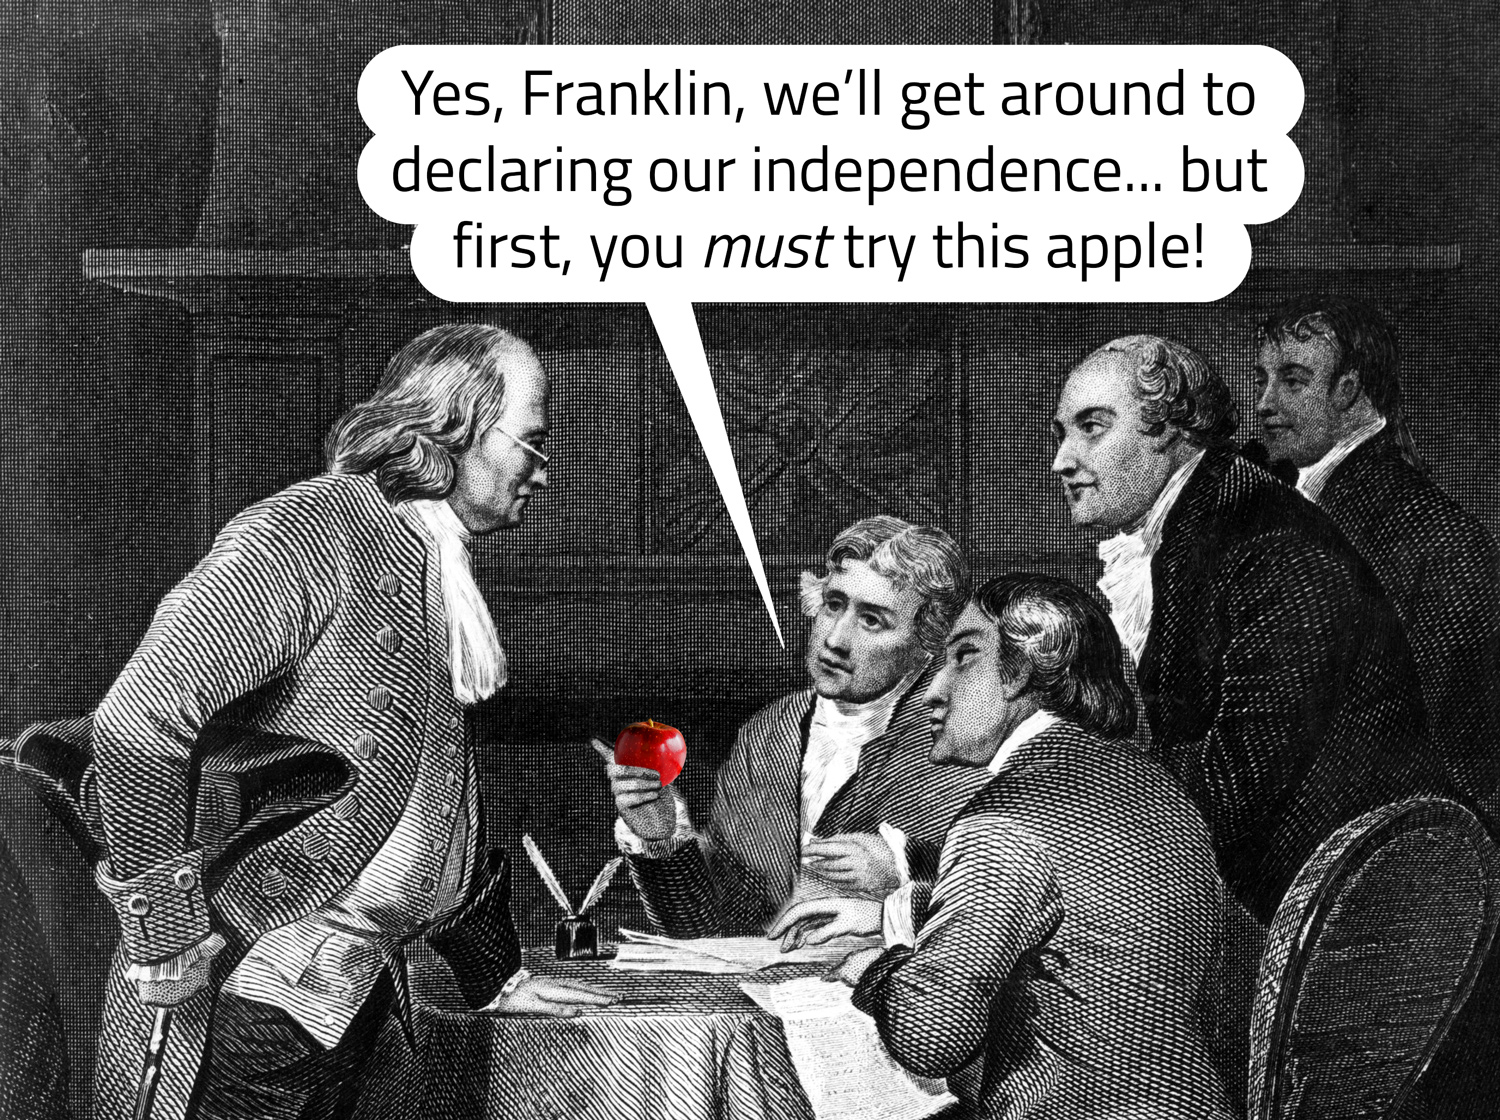 Thomas Jefferson sits with some of the Founding Fathers and tells Benjamin Franklin he must try an apple.